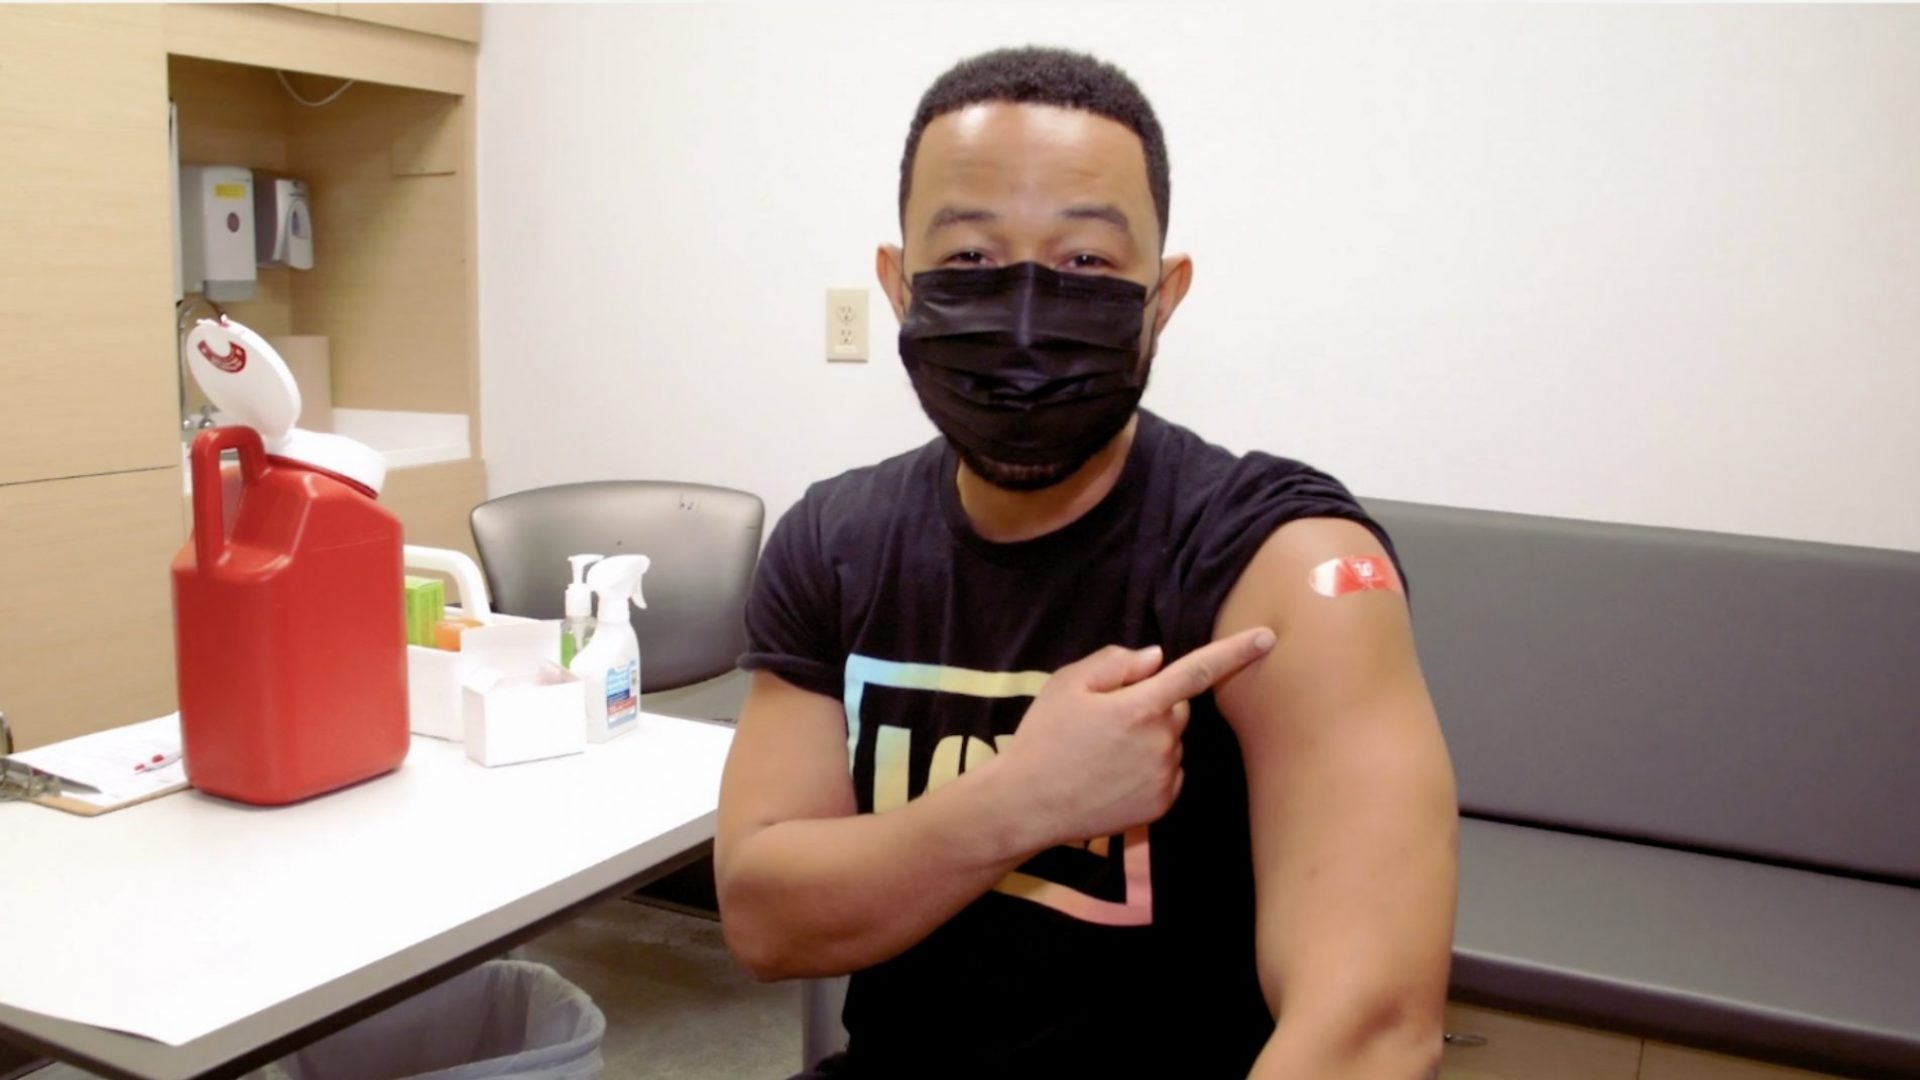 John Legend Got His COVID-19 Vaccine And Wants You To Get Yours, Too: "We Finally Have A Reason For Optimism"